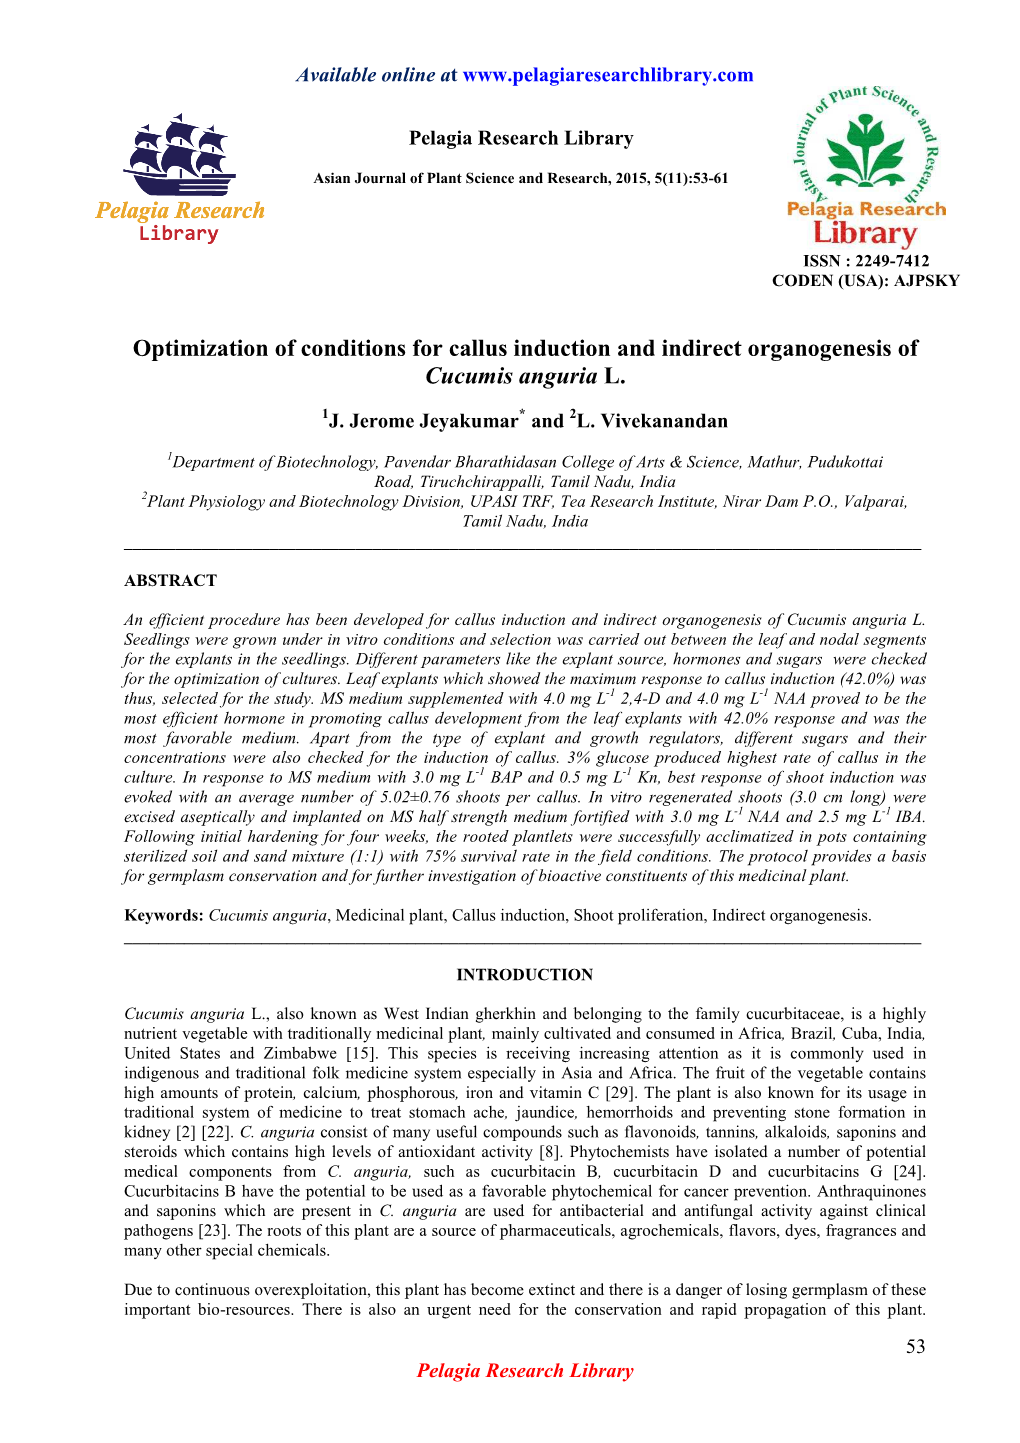 Optimization of Conditions for Callus Induction and Indirect Organogenesis of Cucumis Anguria L